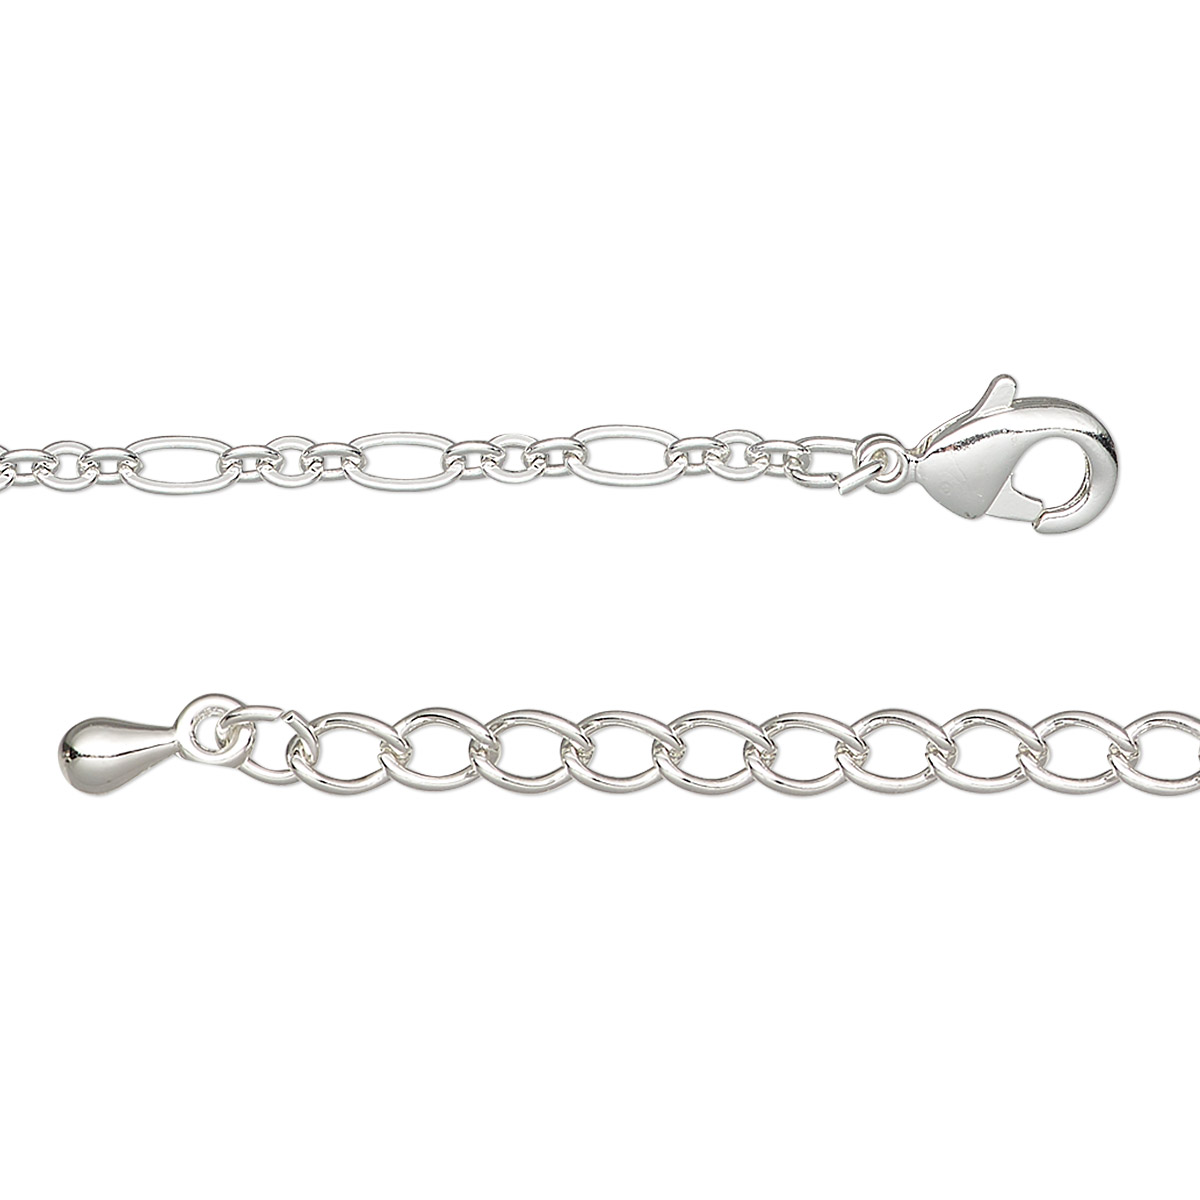 Chain, silver-plated steel and brass, 2.5mm figaro, 18 inches with 2 ...